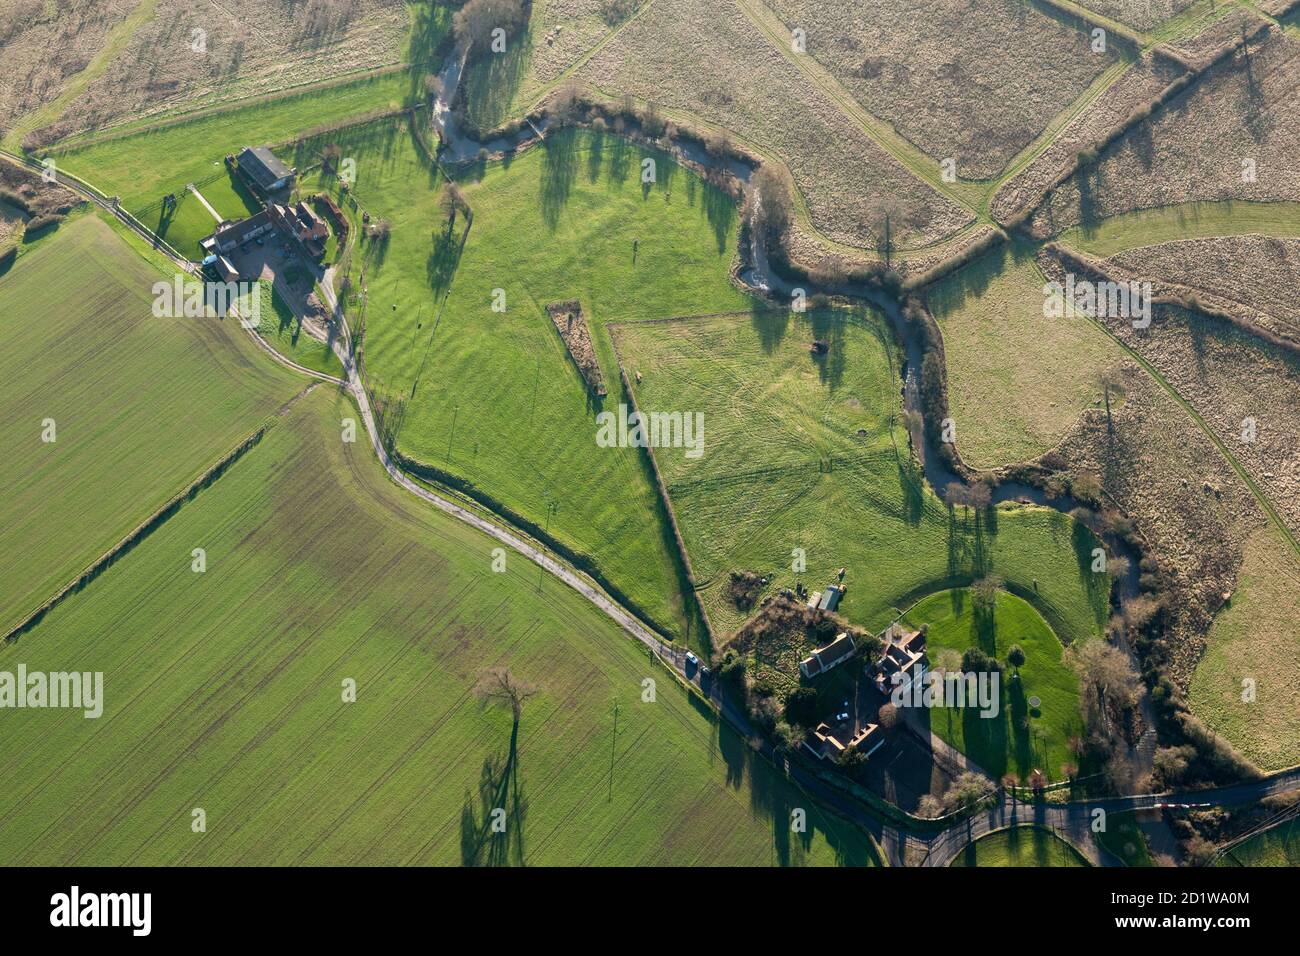 Spernall, Warwickshire. Ridge and furrow and the site of a deserted settlement at Spernall, Warwickshire. Aerial view. Stock Photo